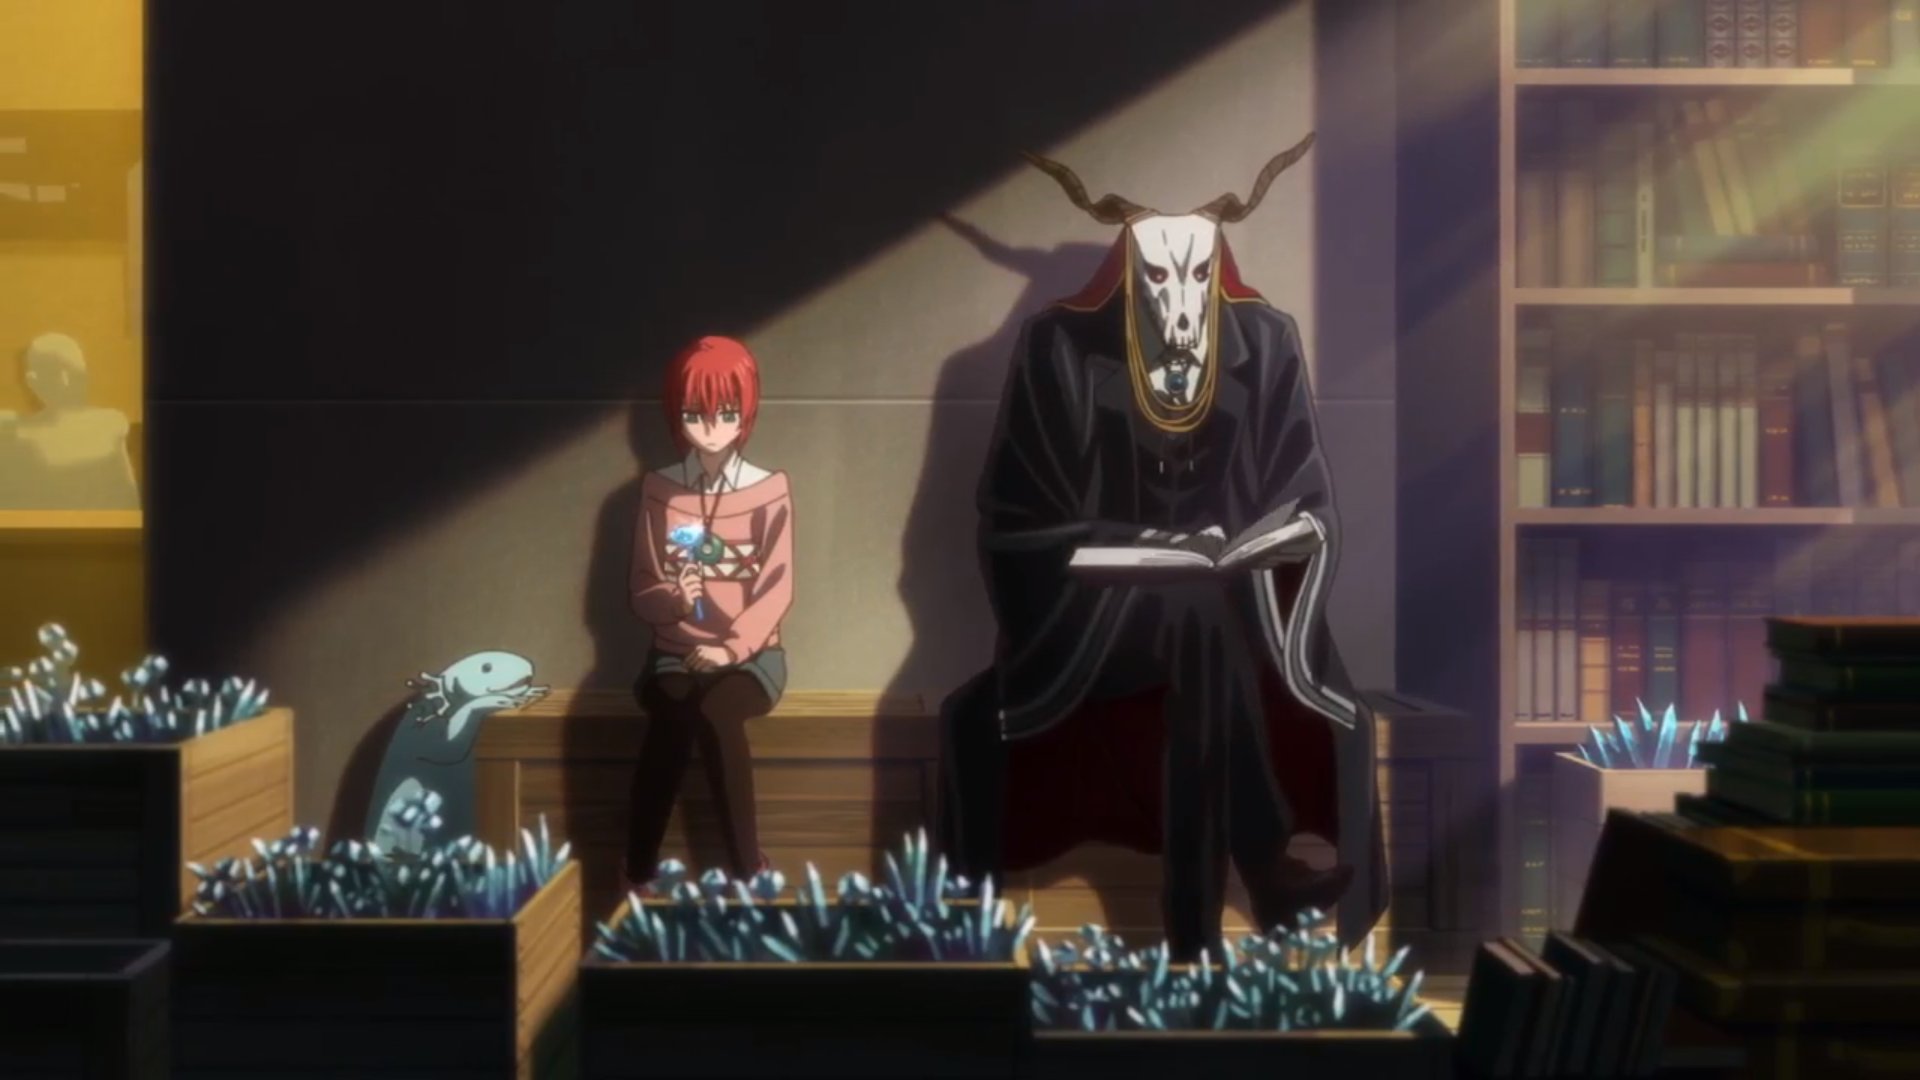 Weeb Central on X: The Ancient Magus' Bride Season 2 Ep 2 is